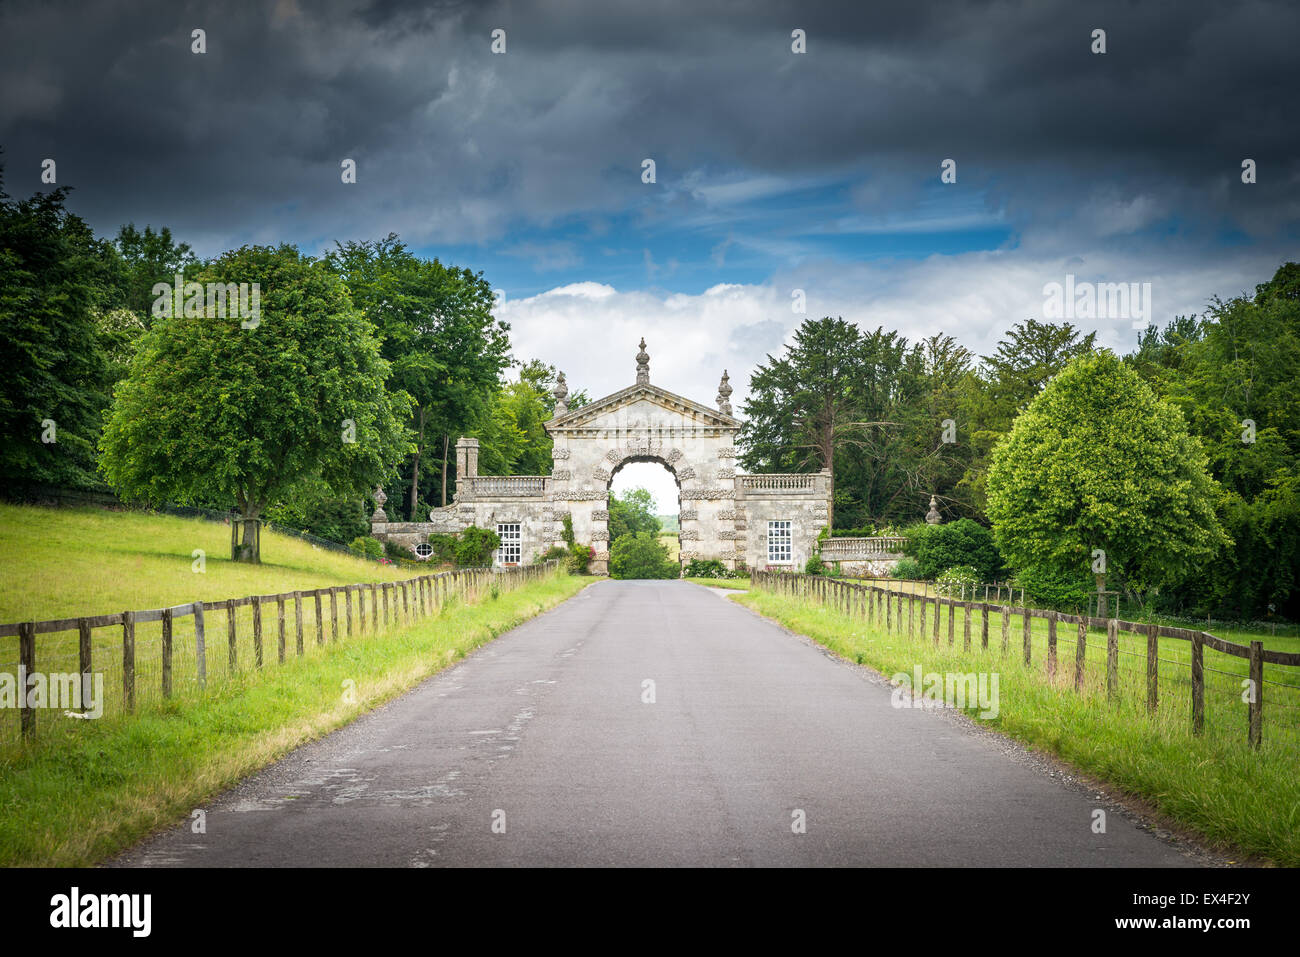 The Arch, Fonthill Estate, Wiltshire, UK Stock Photo